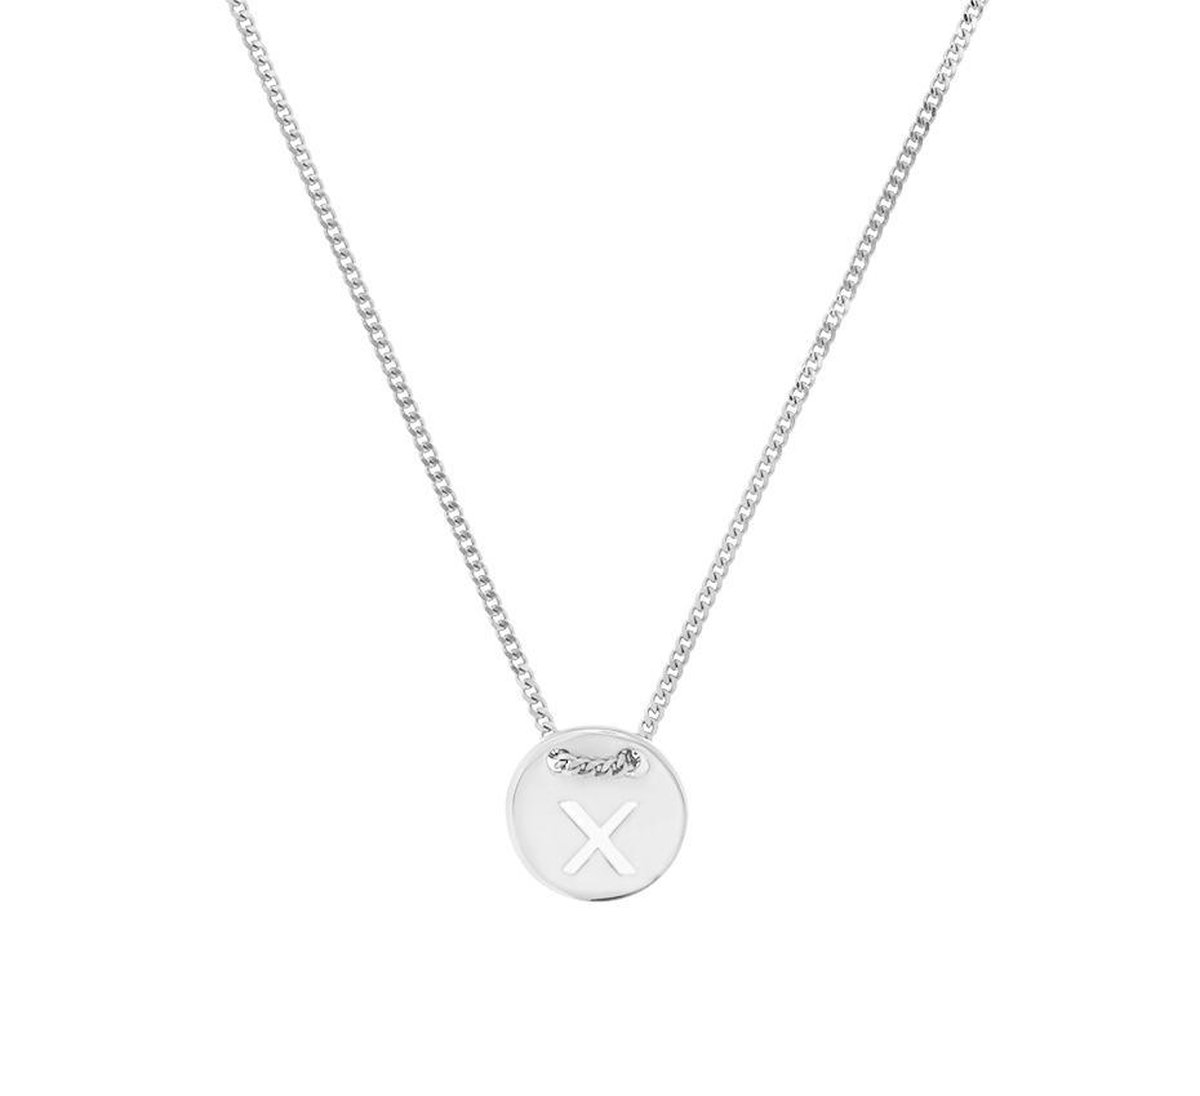 The Fashion Jewelry Collection Ketting Letter X 1,3 mm 41 + 4 cm - Zilver Gerhodineerd